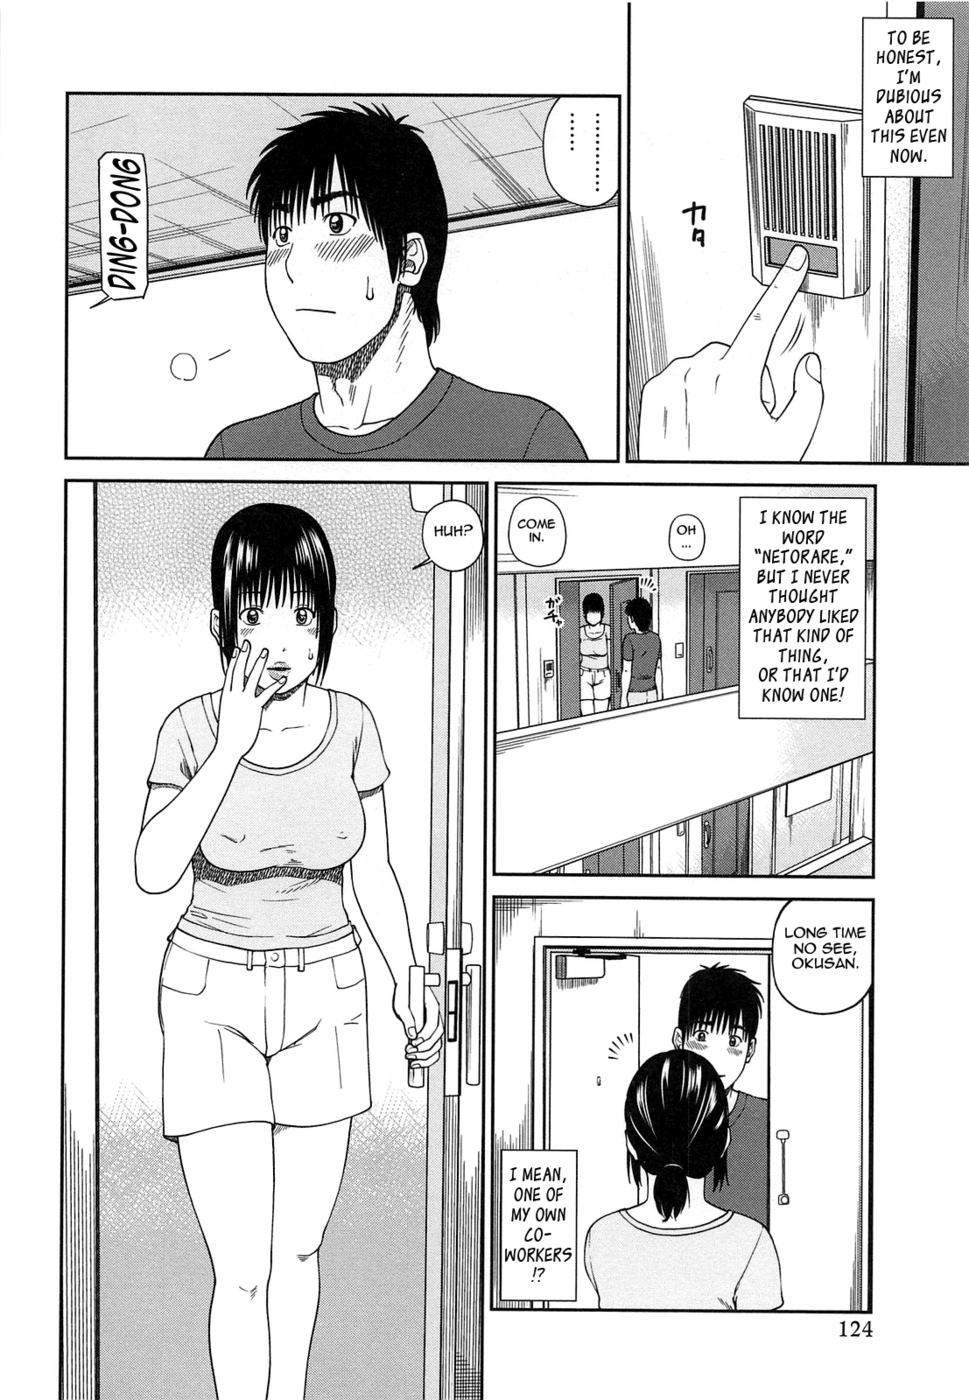 Hentai Manga Comic-35 Year Old Ripe Wife-Chapter 7-Assistance With First-Time Netorare 01-2